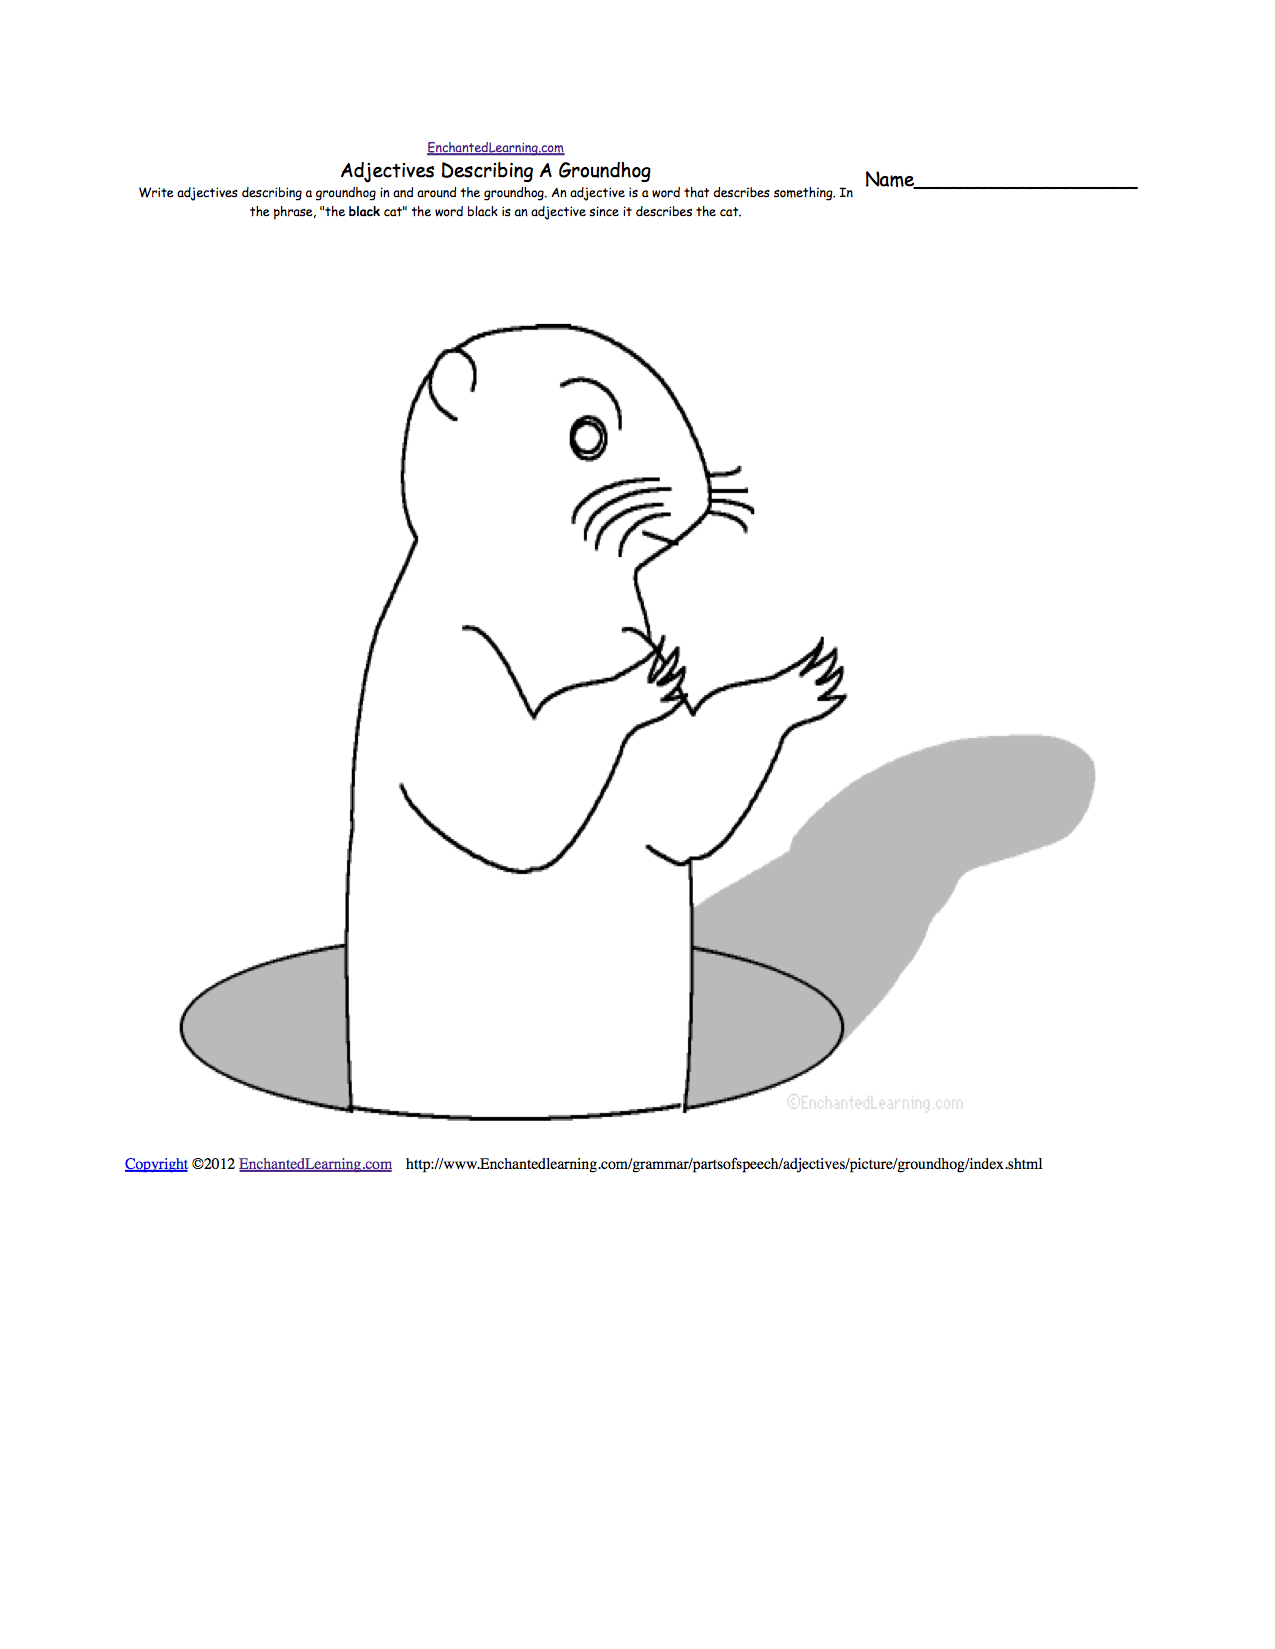 Groundhog Day Printable Coloring Pages Groundhog Day Crafts Worksheets And Printable Books